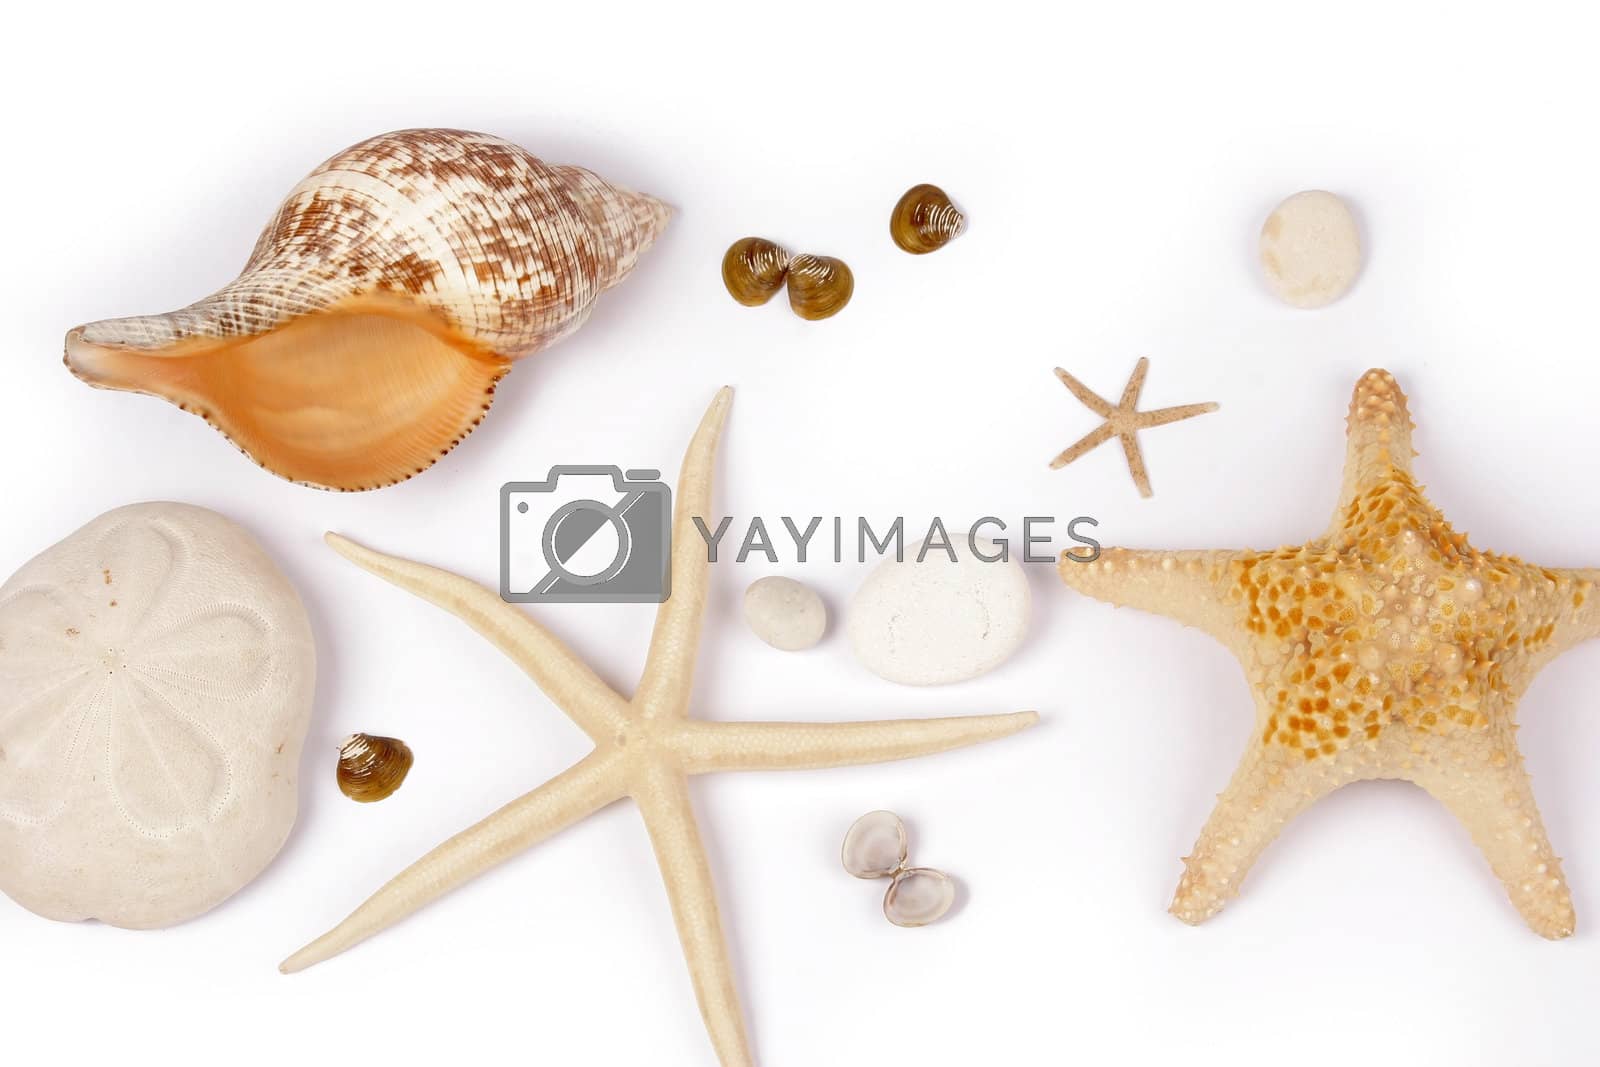 Royalty free image of Sea shell and star fish by PixAchi